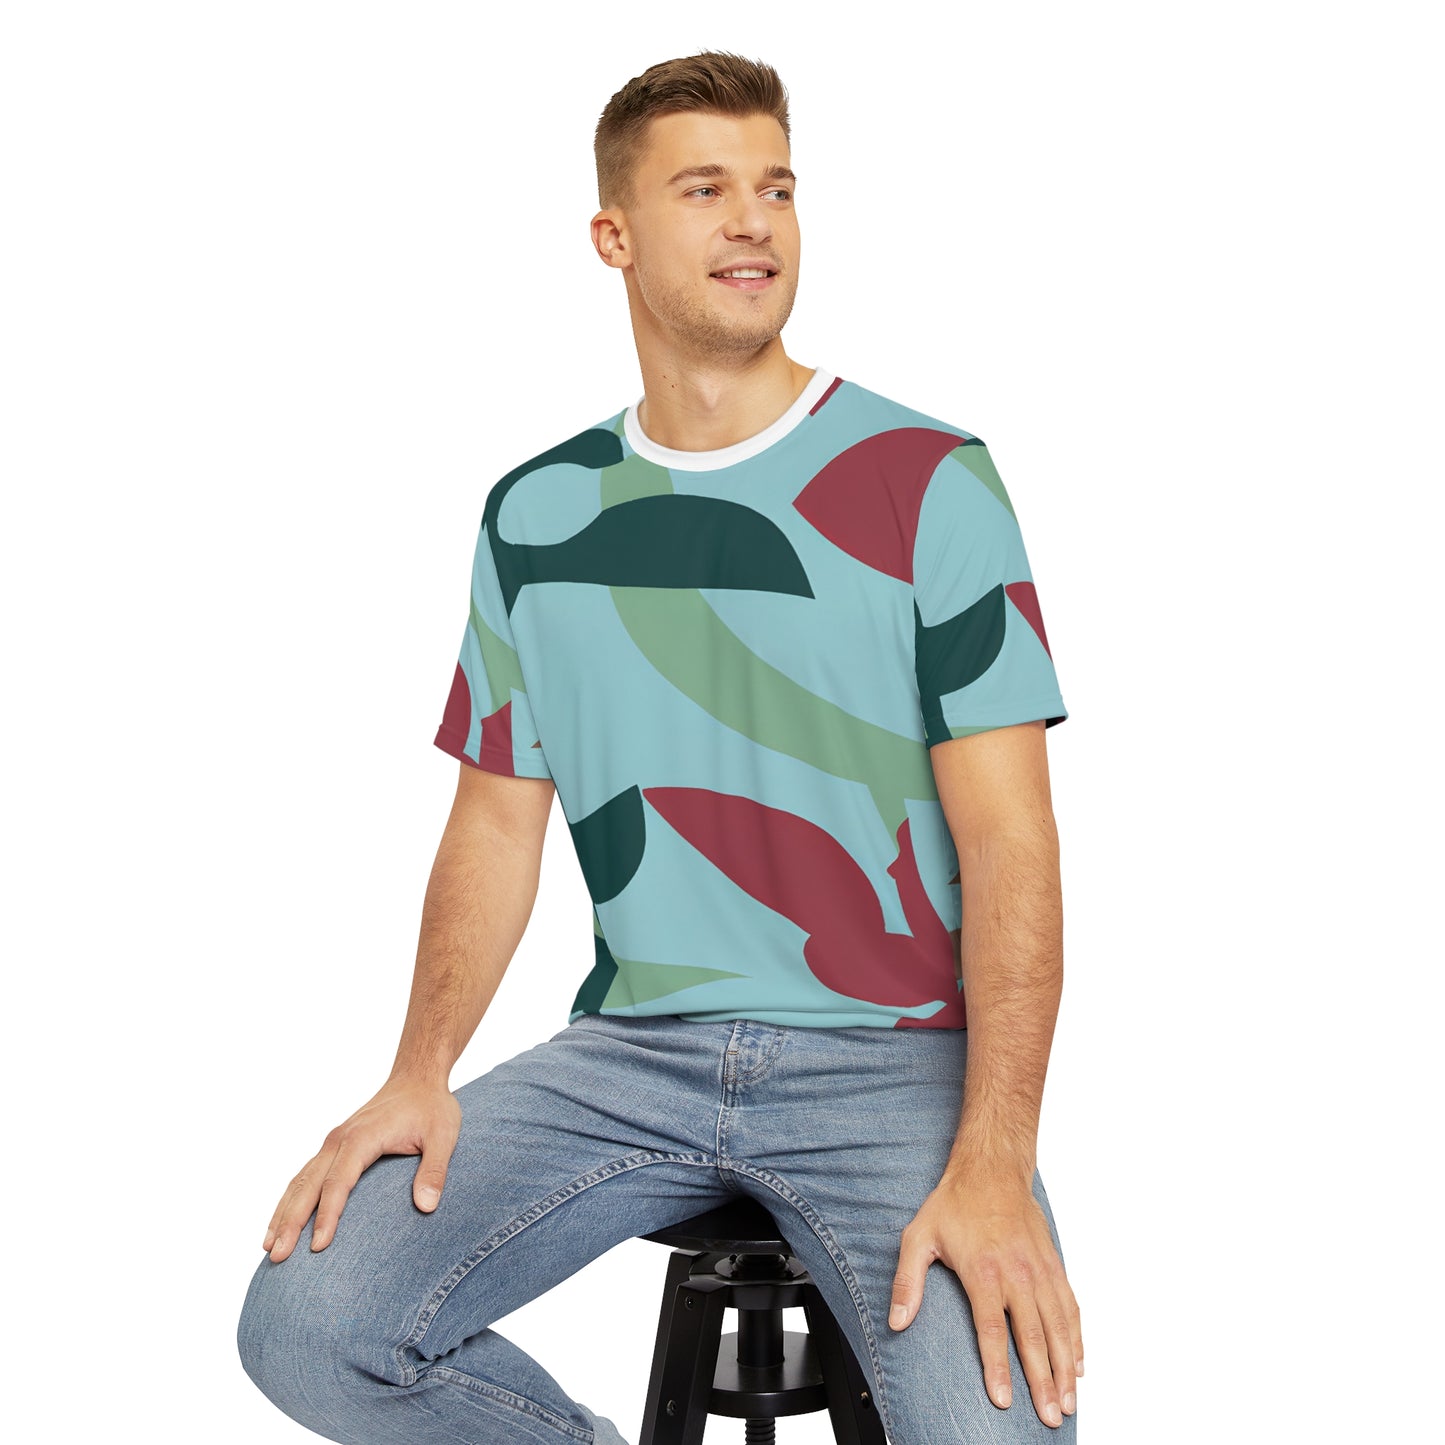 Chaparral Ione - Men's Expression Shirt